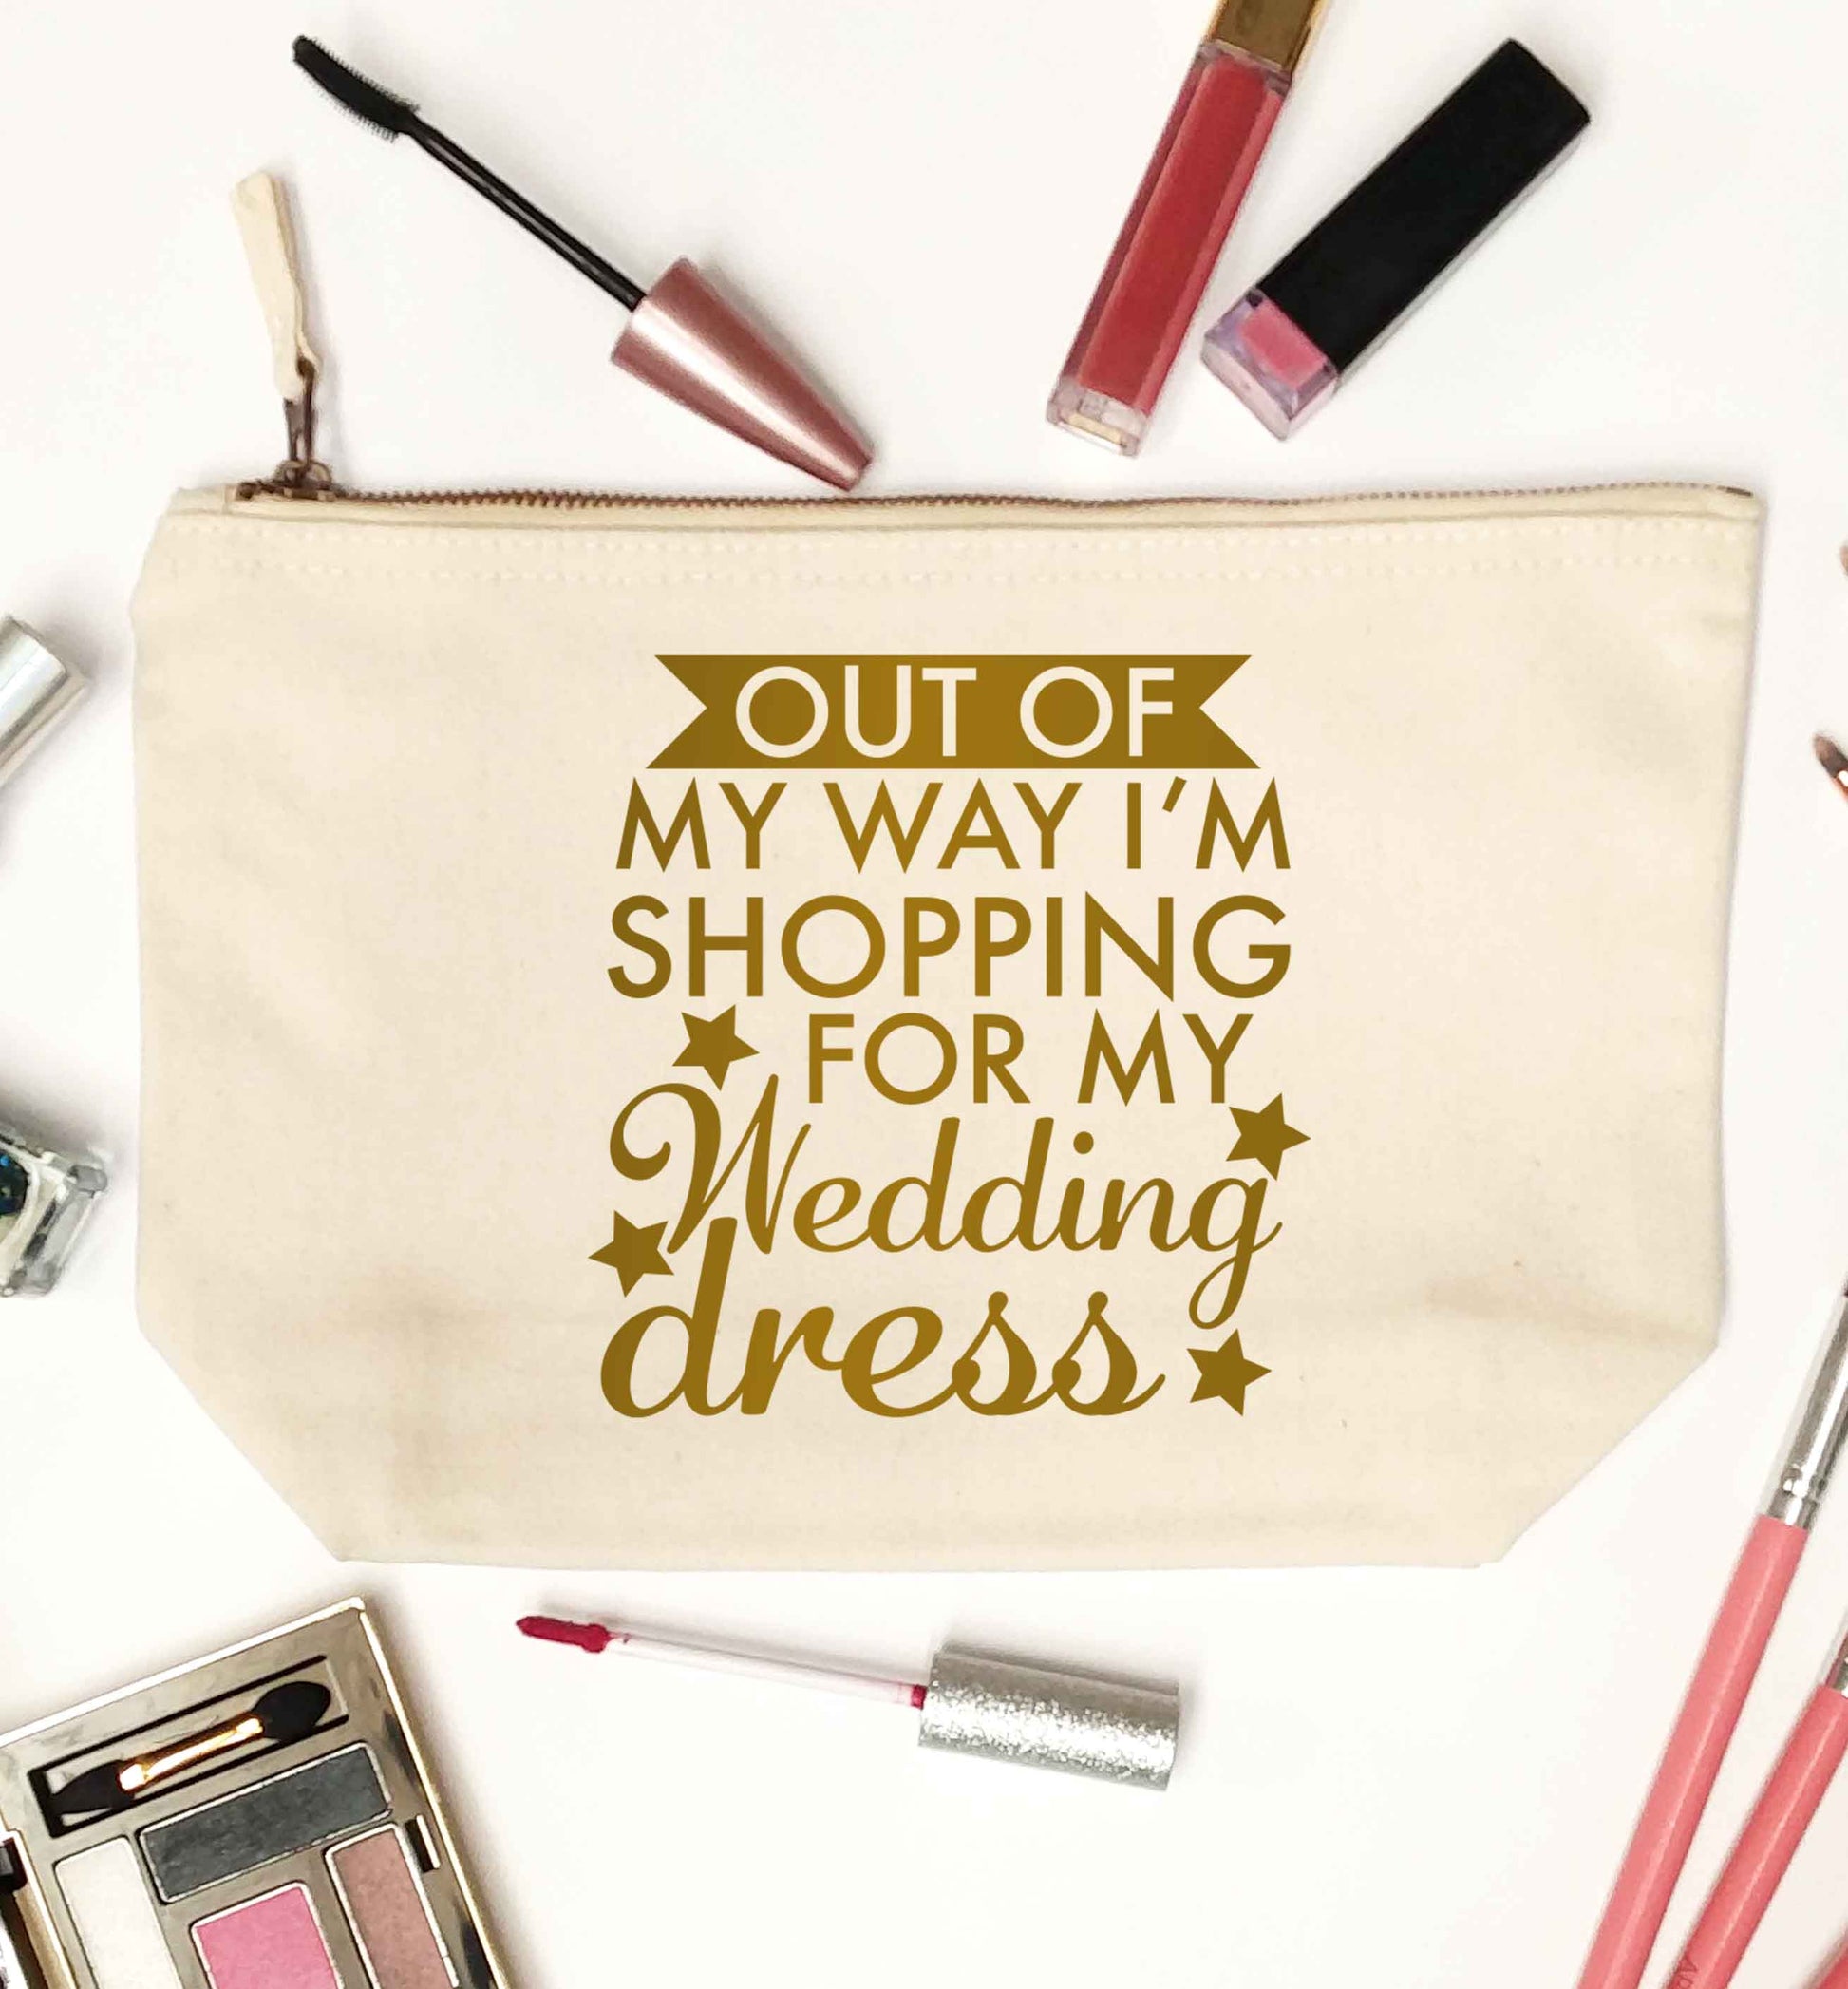 Out of my way I'm shopping for my wedding dress natural makeup bag